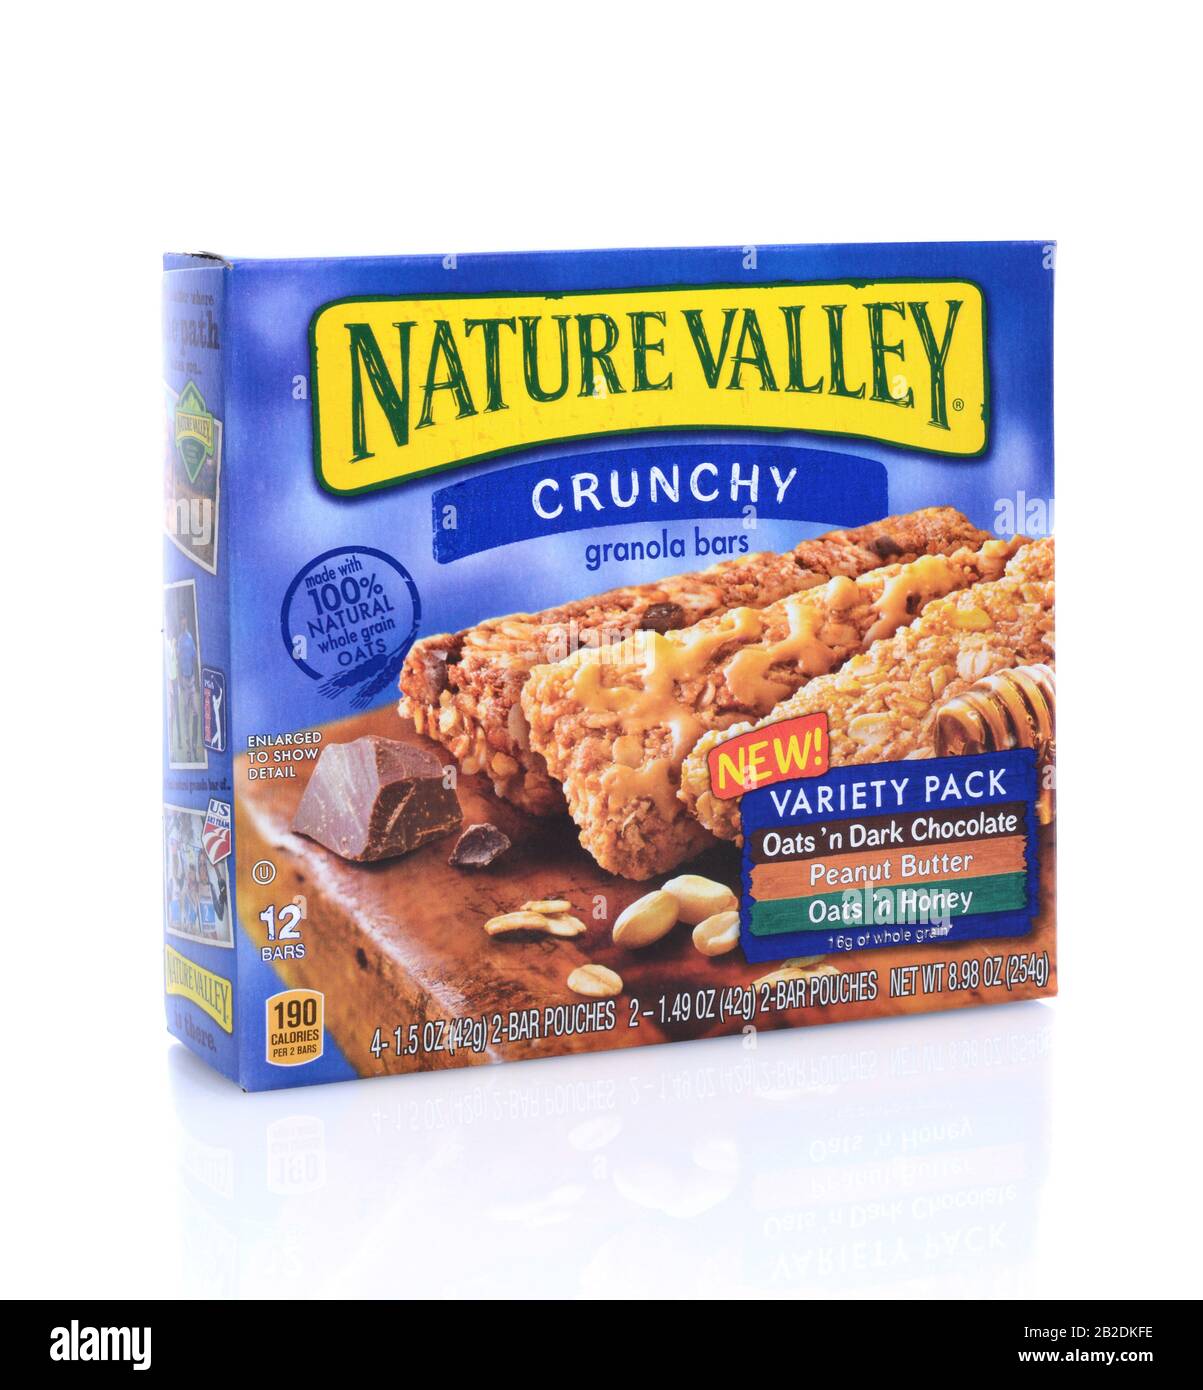 IRVINE, CA - May 14, 2014: A 12 count box of Nature Valley Granola Bars. A product of General Mills headquartered in the Minneapolis suburb of Golden Stock Photo